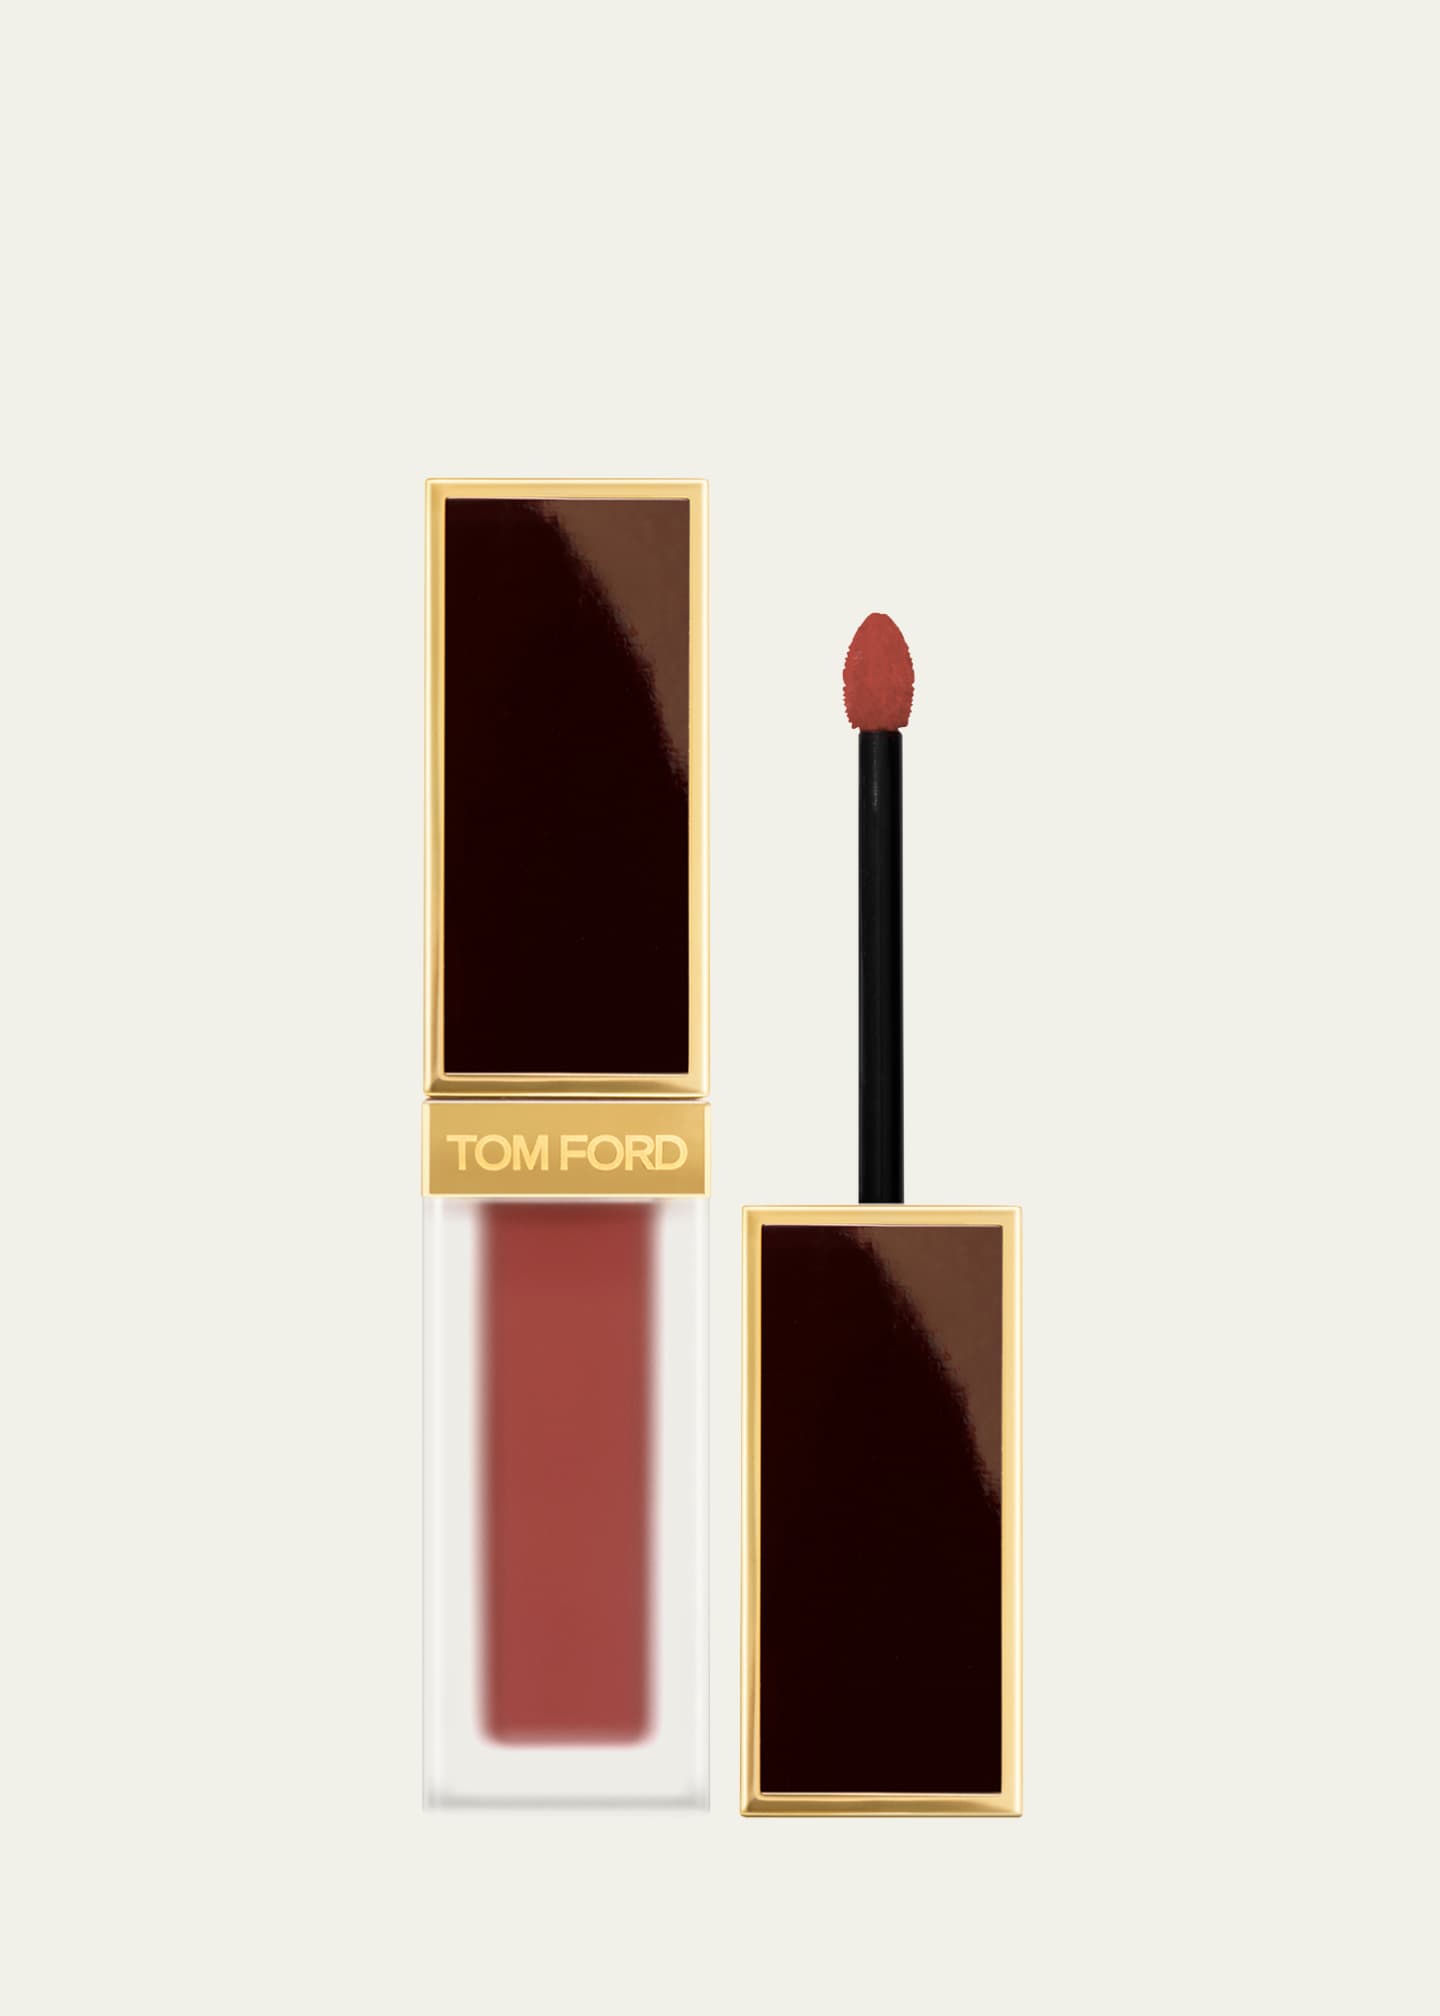 Tom Ford Beauty Products : Lipsticks & Perfumes at Bergdorf Goodman